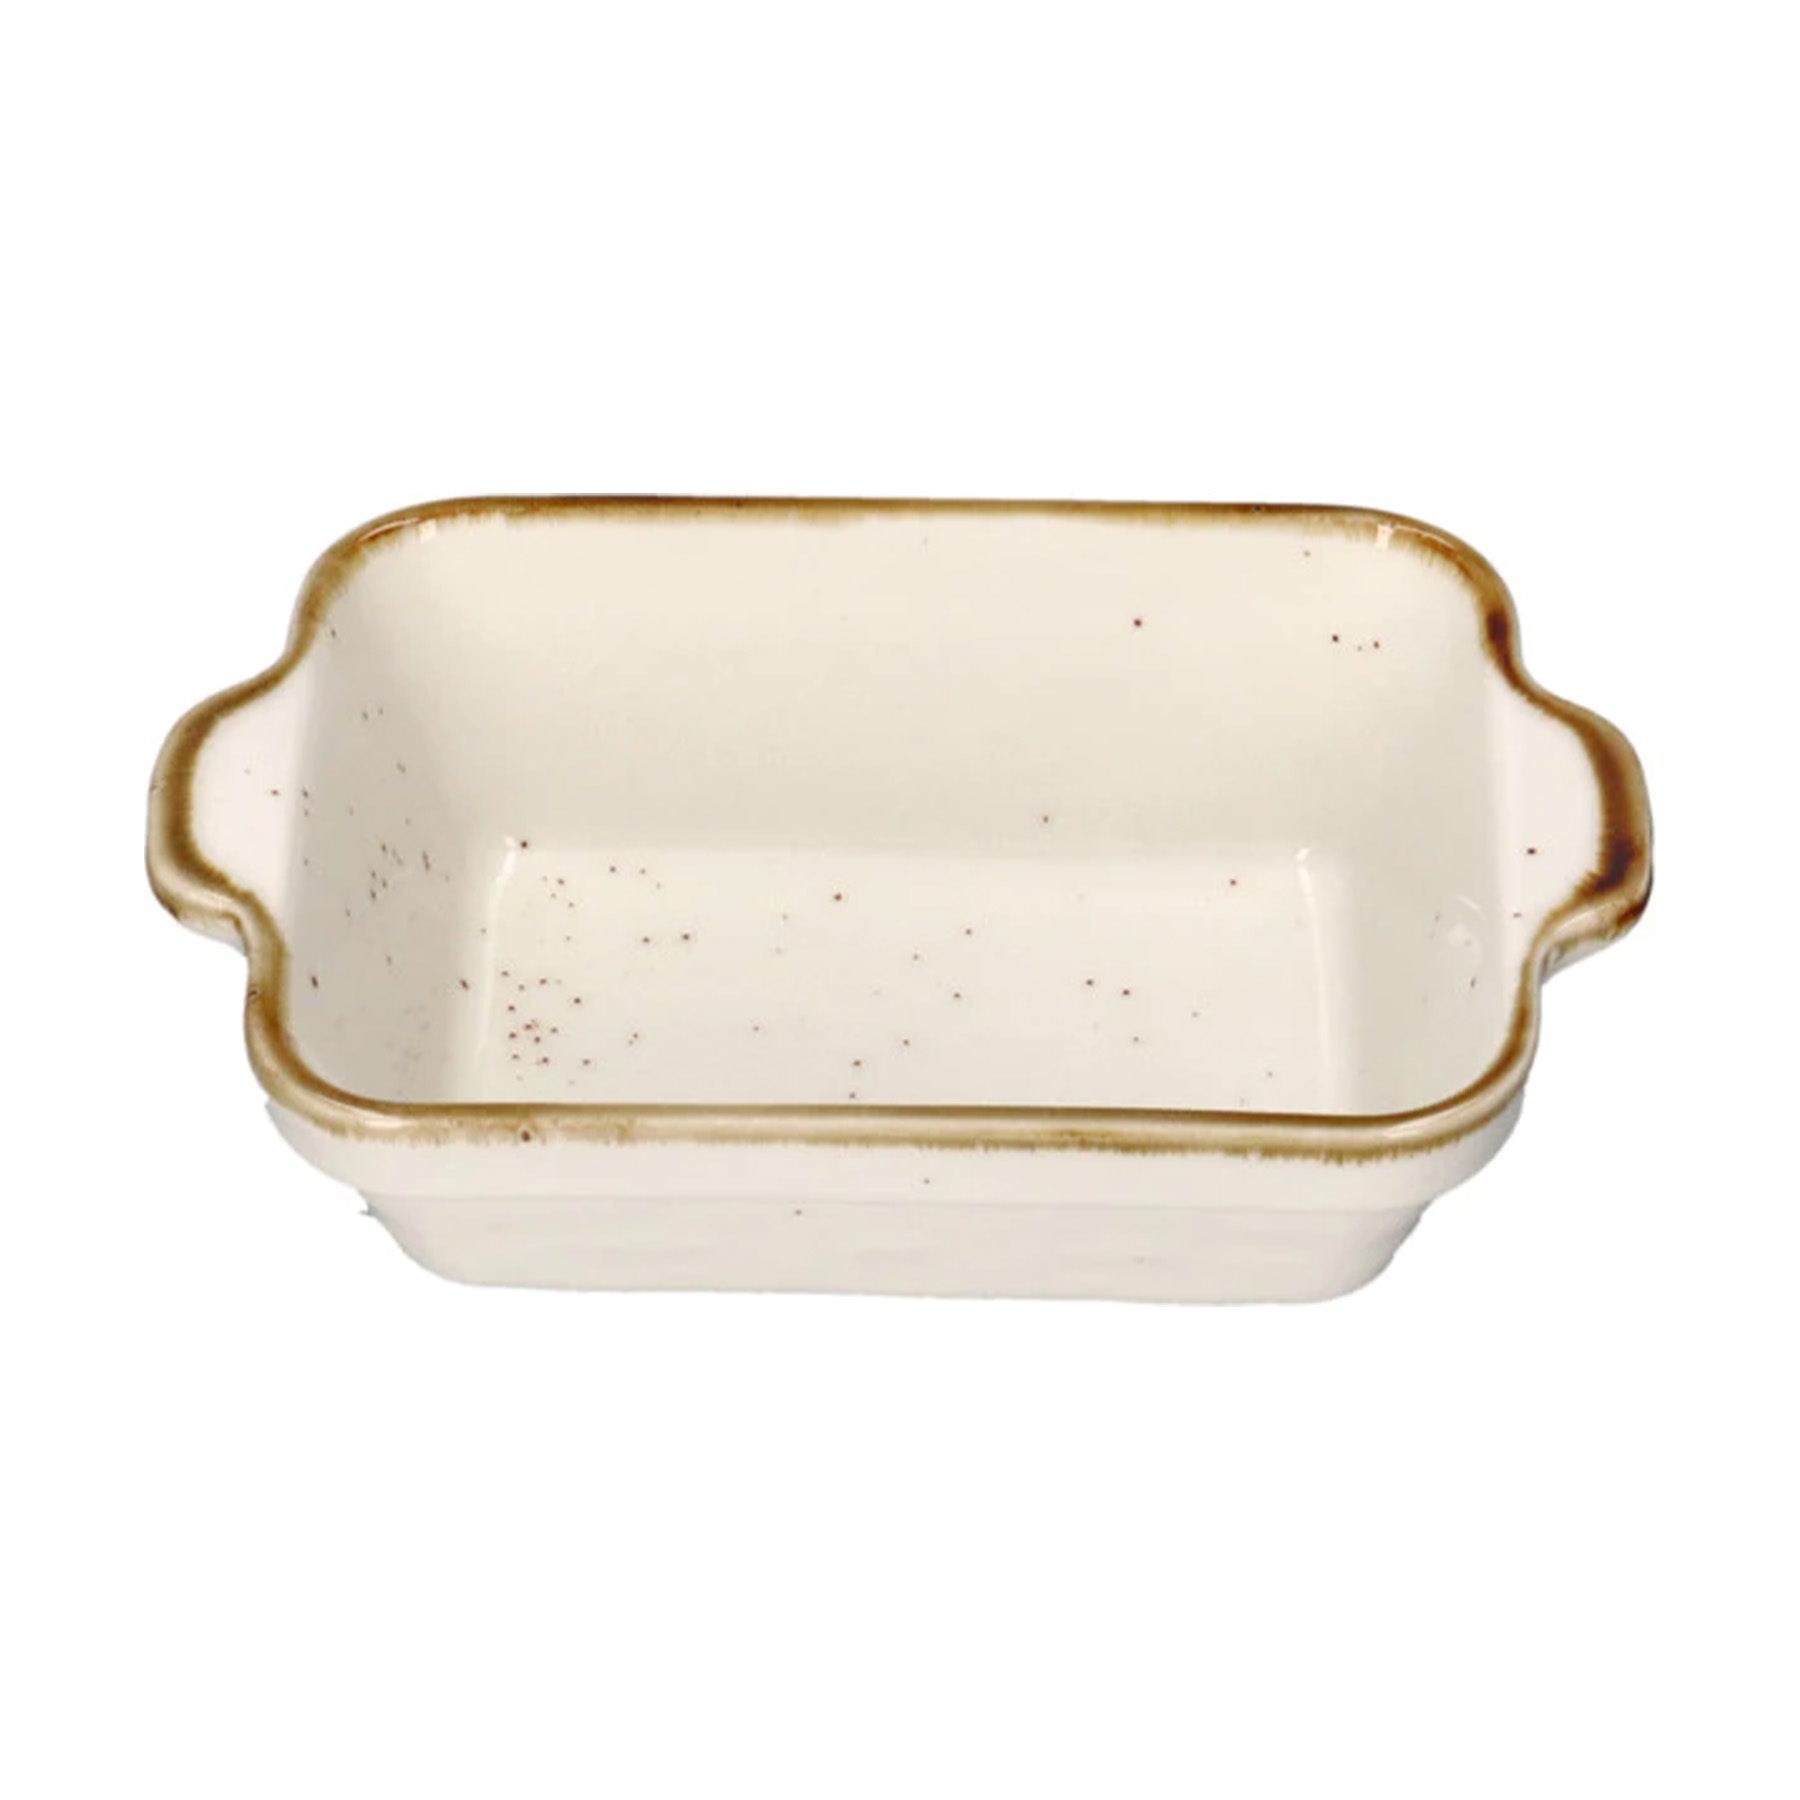 Rectangular plate with handles, White